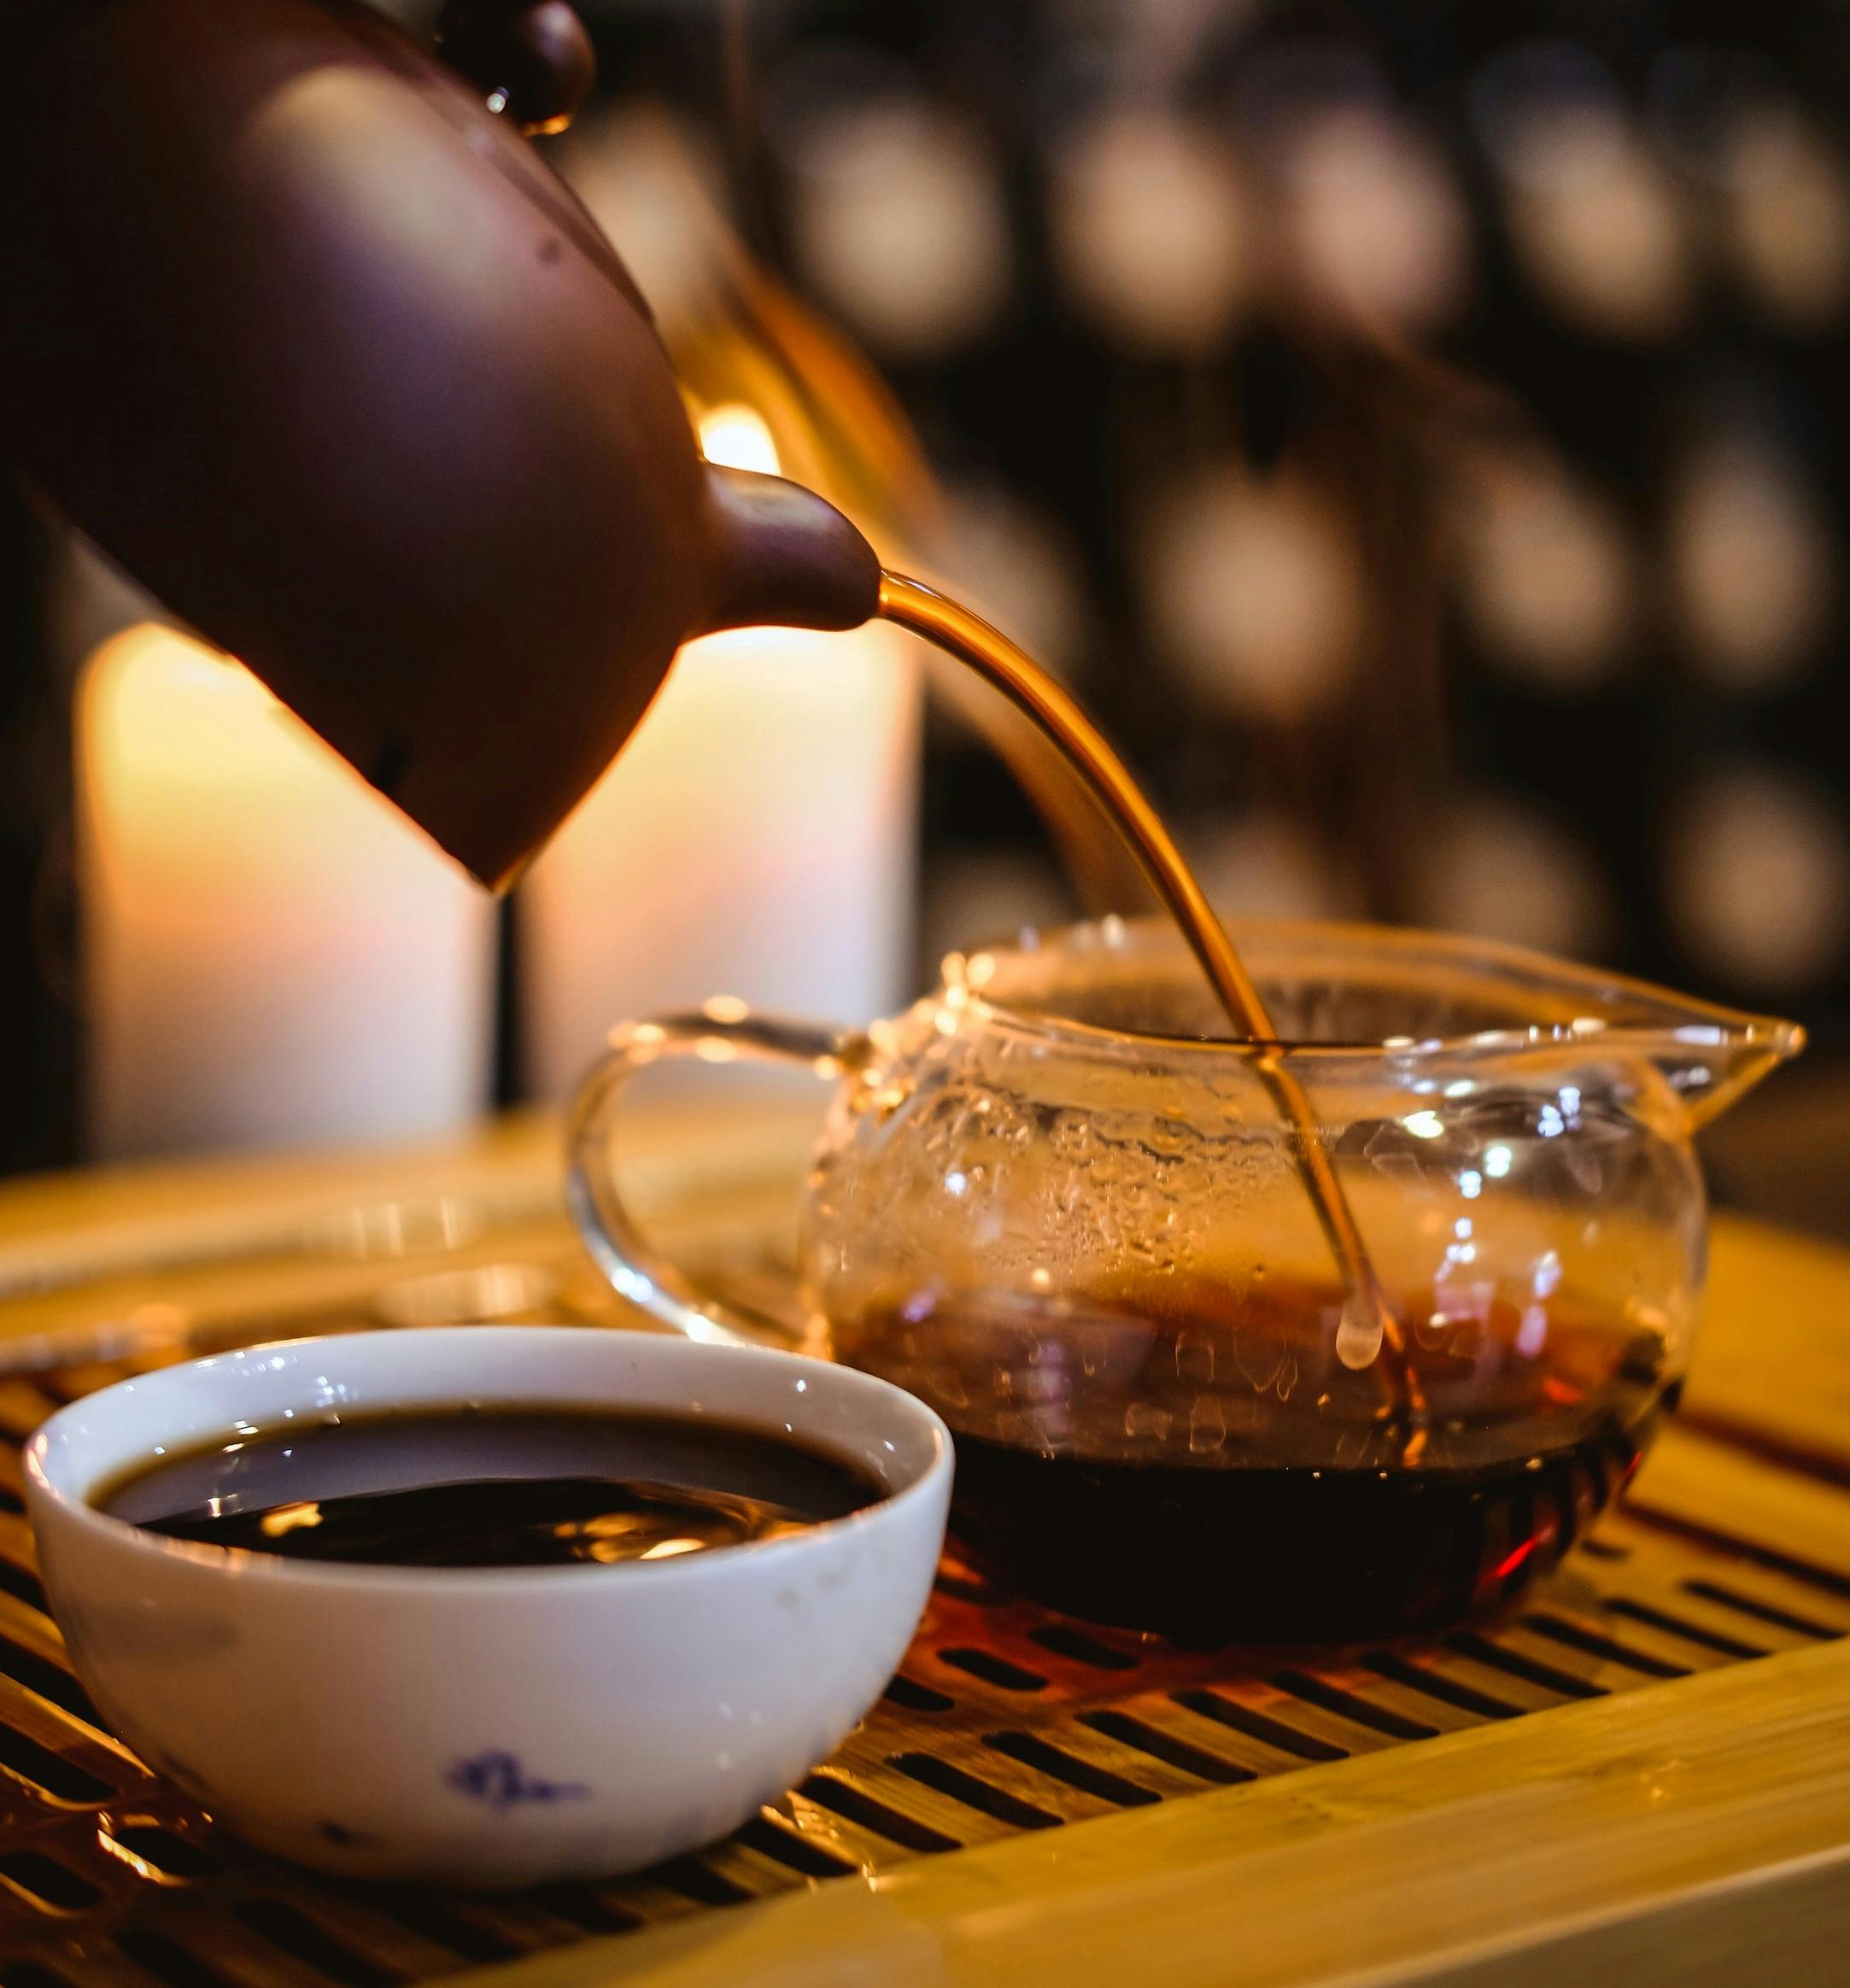 Background image - ripe puer tea pouring from brown clay teapot